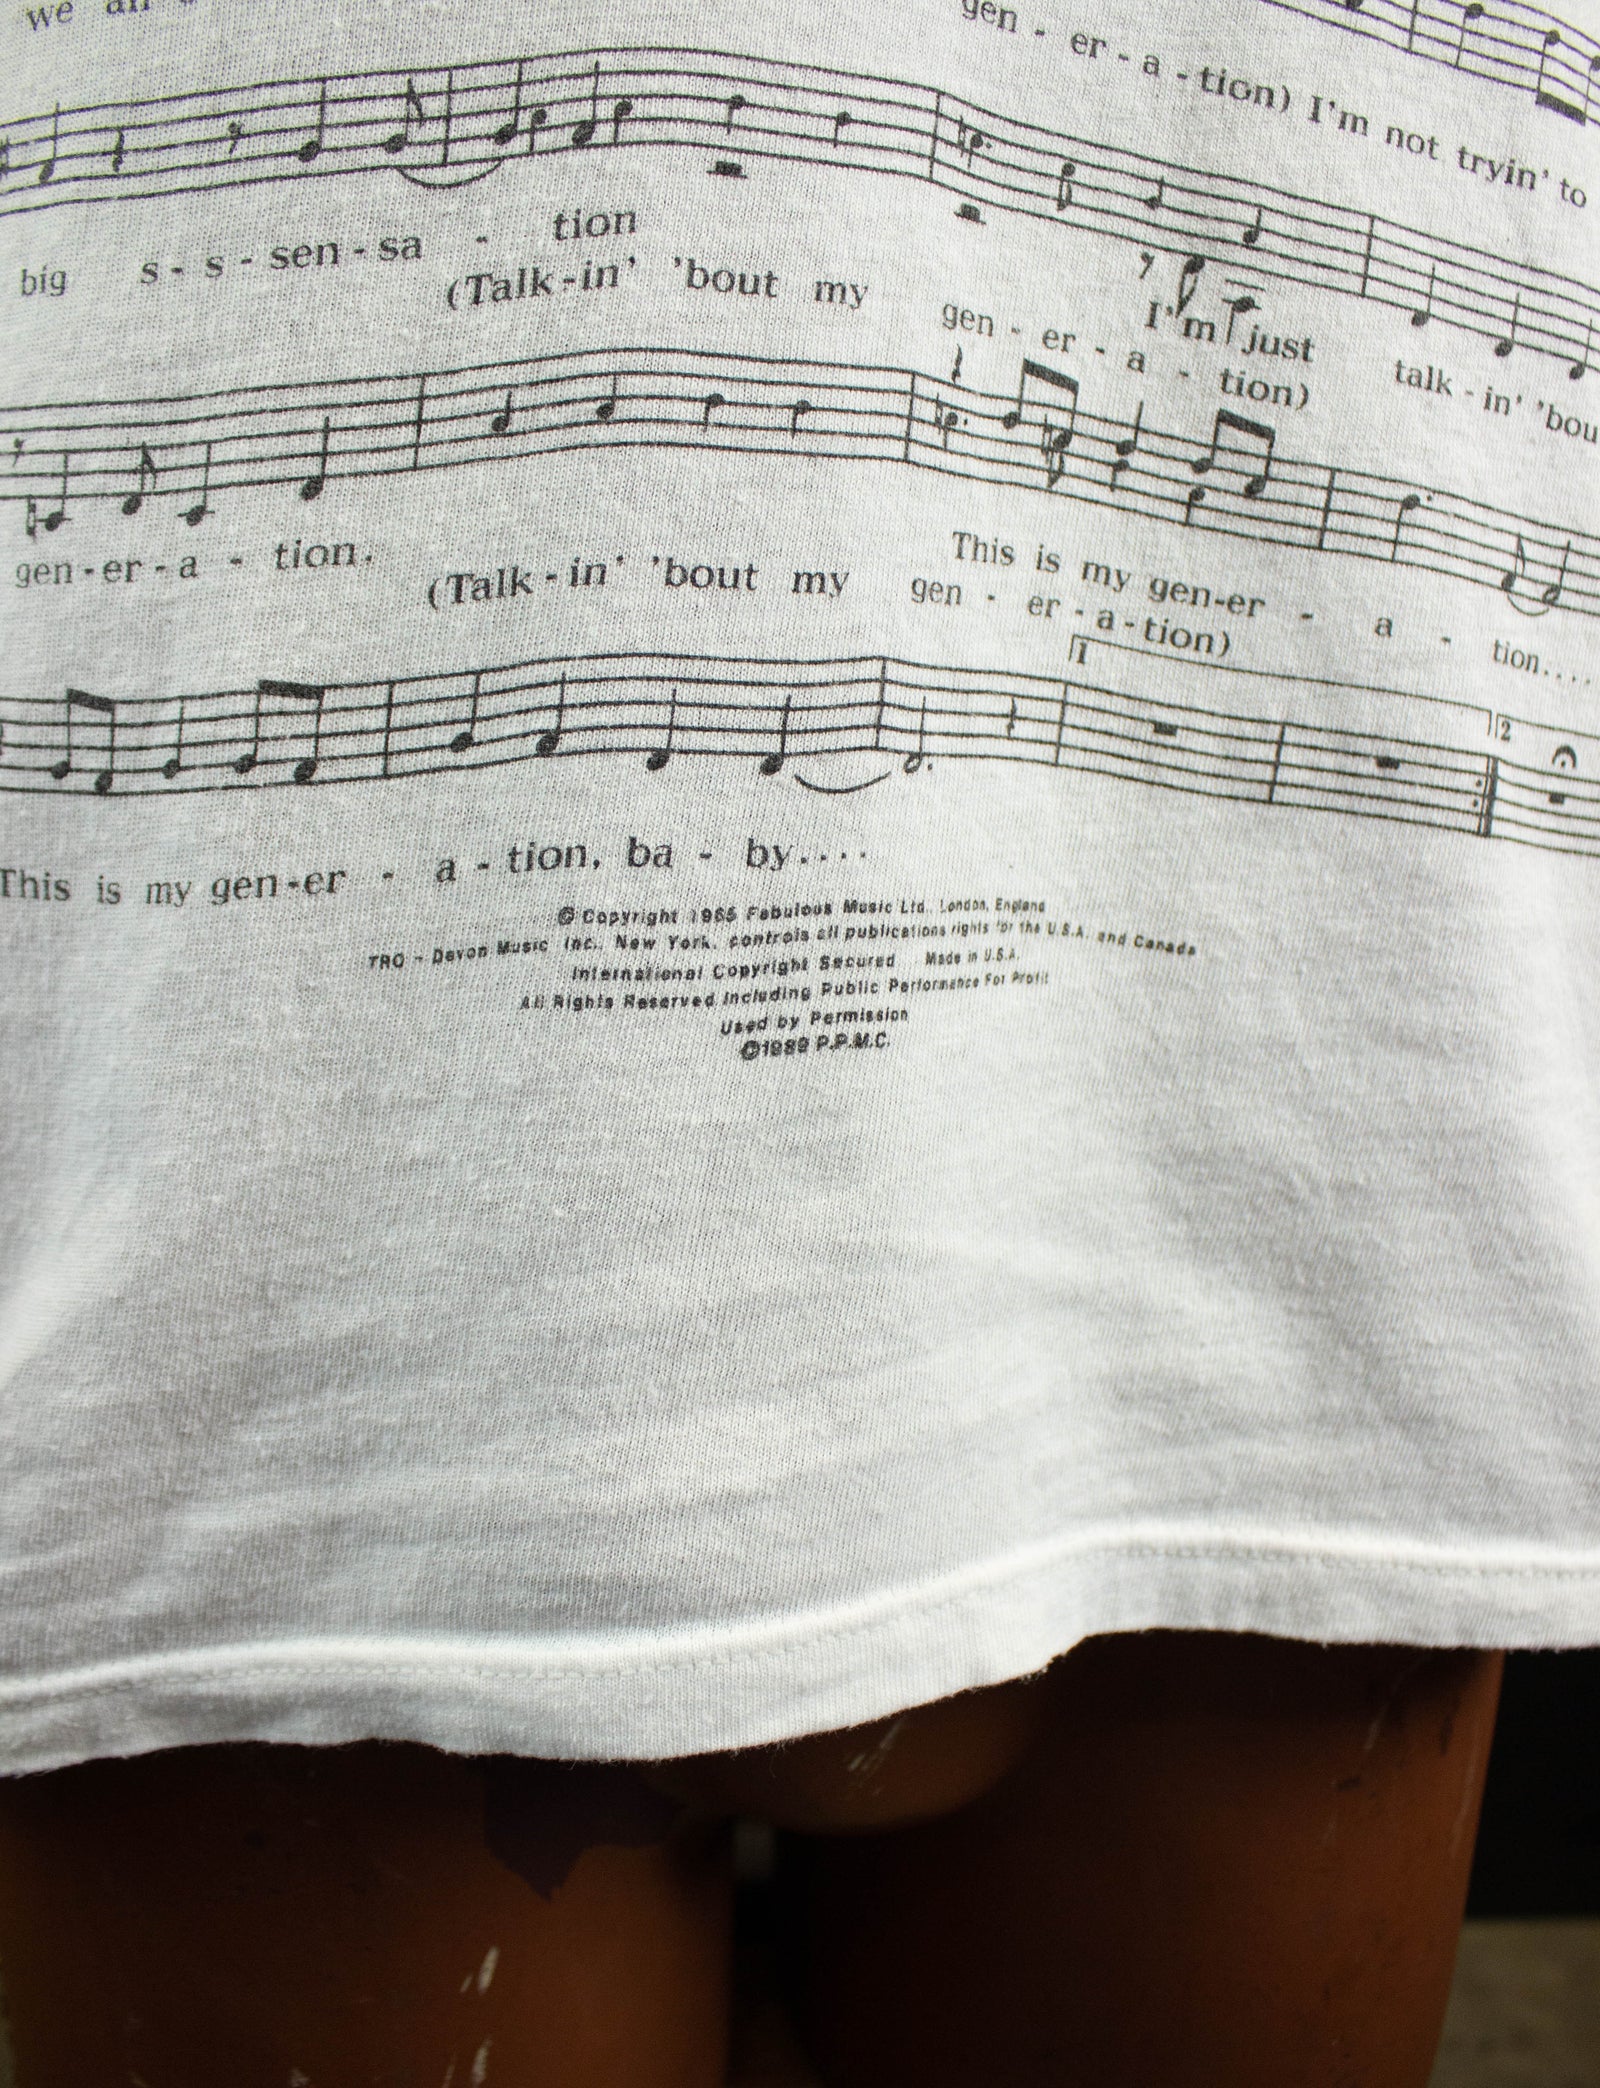 Vintage The Who Concert T Shirt 1989 The Kids Are Alright Tour My Generation Sheet Music White and Red Medium